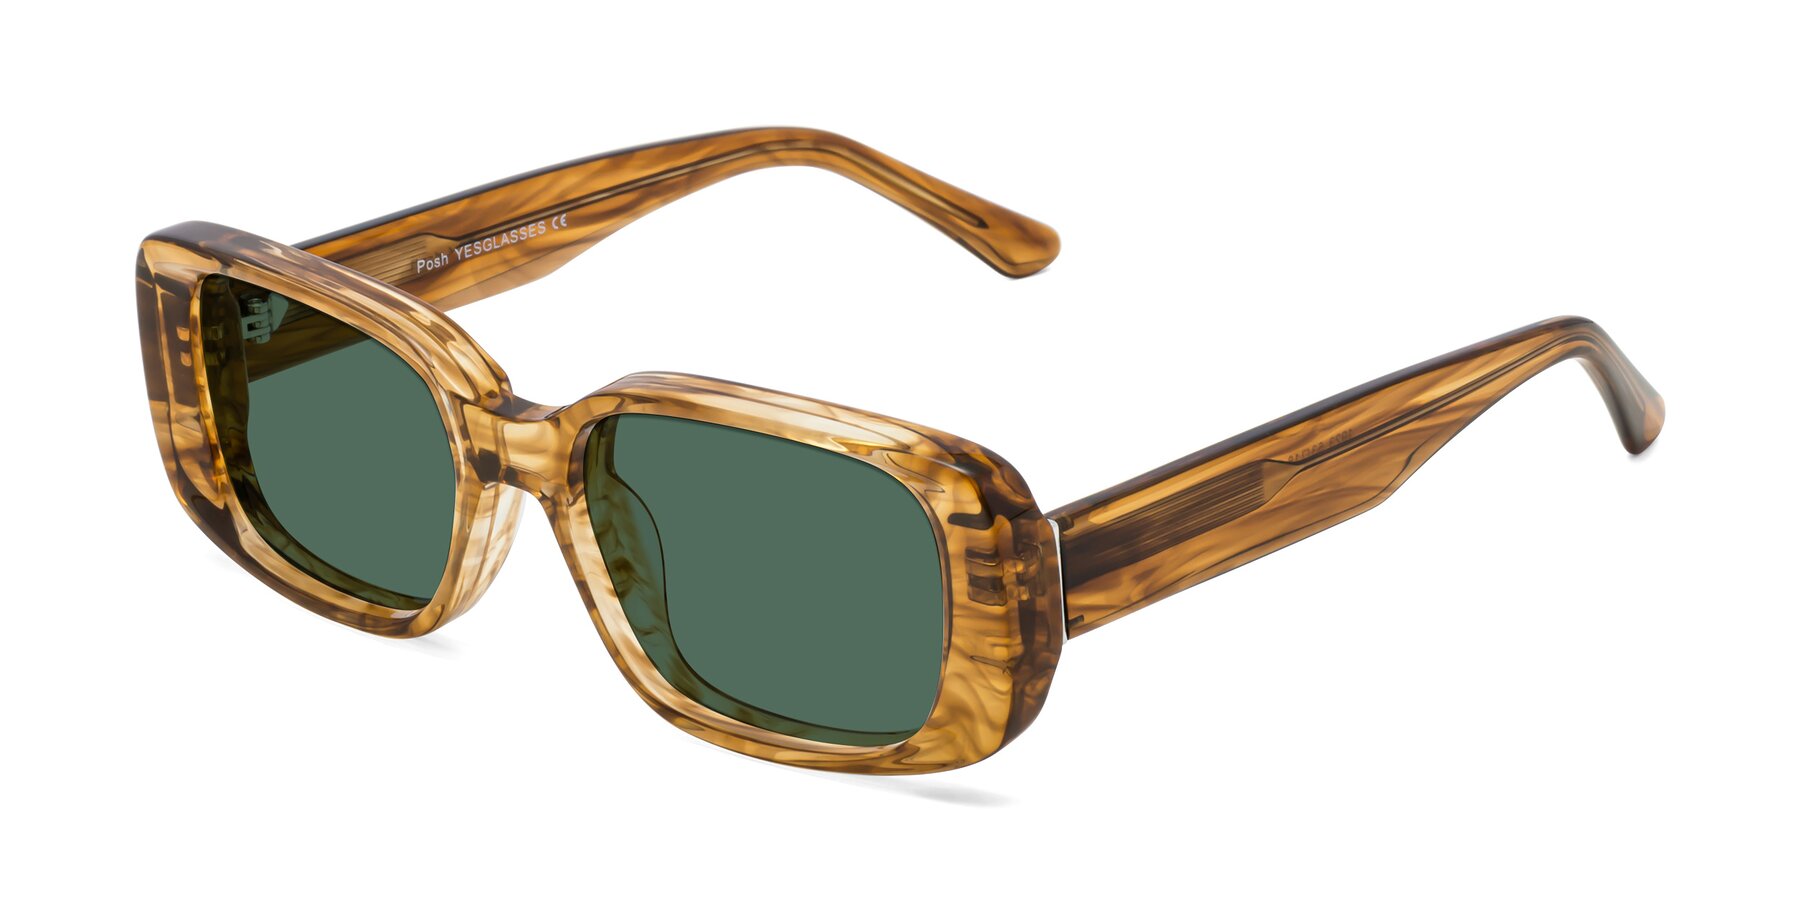 Angle of Posh in Stripe Amber with Green Polarized Lenses